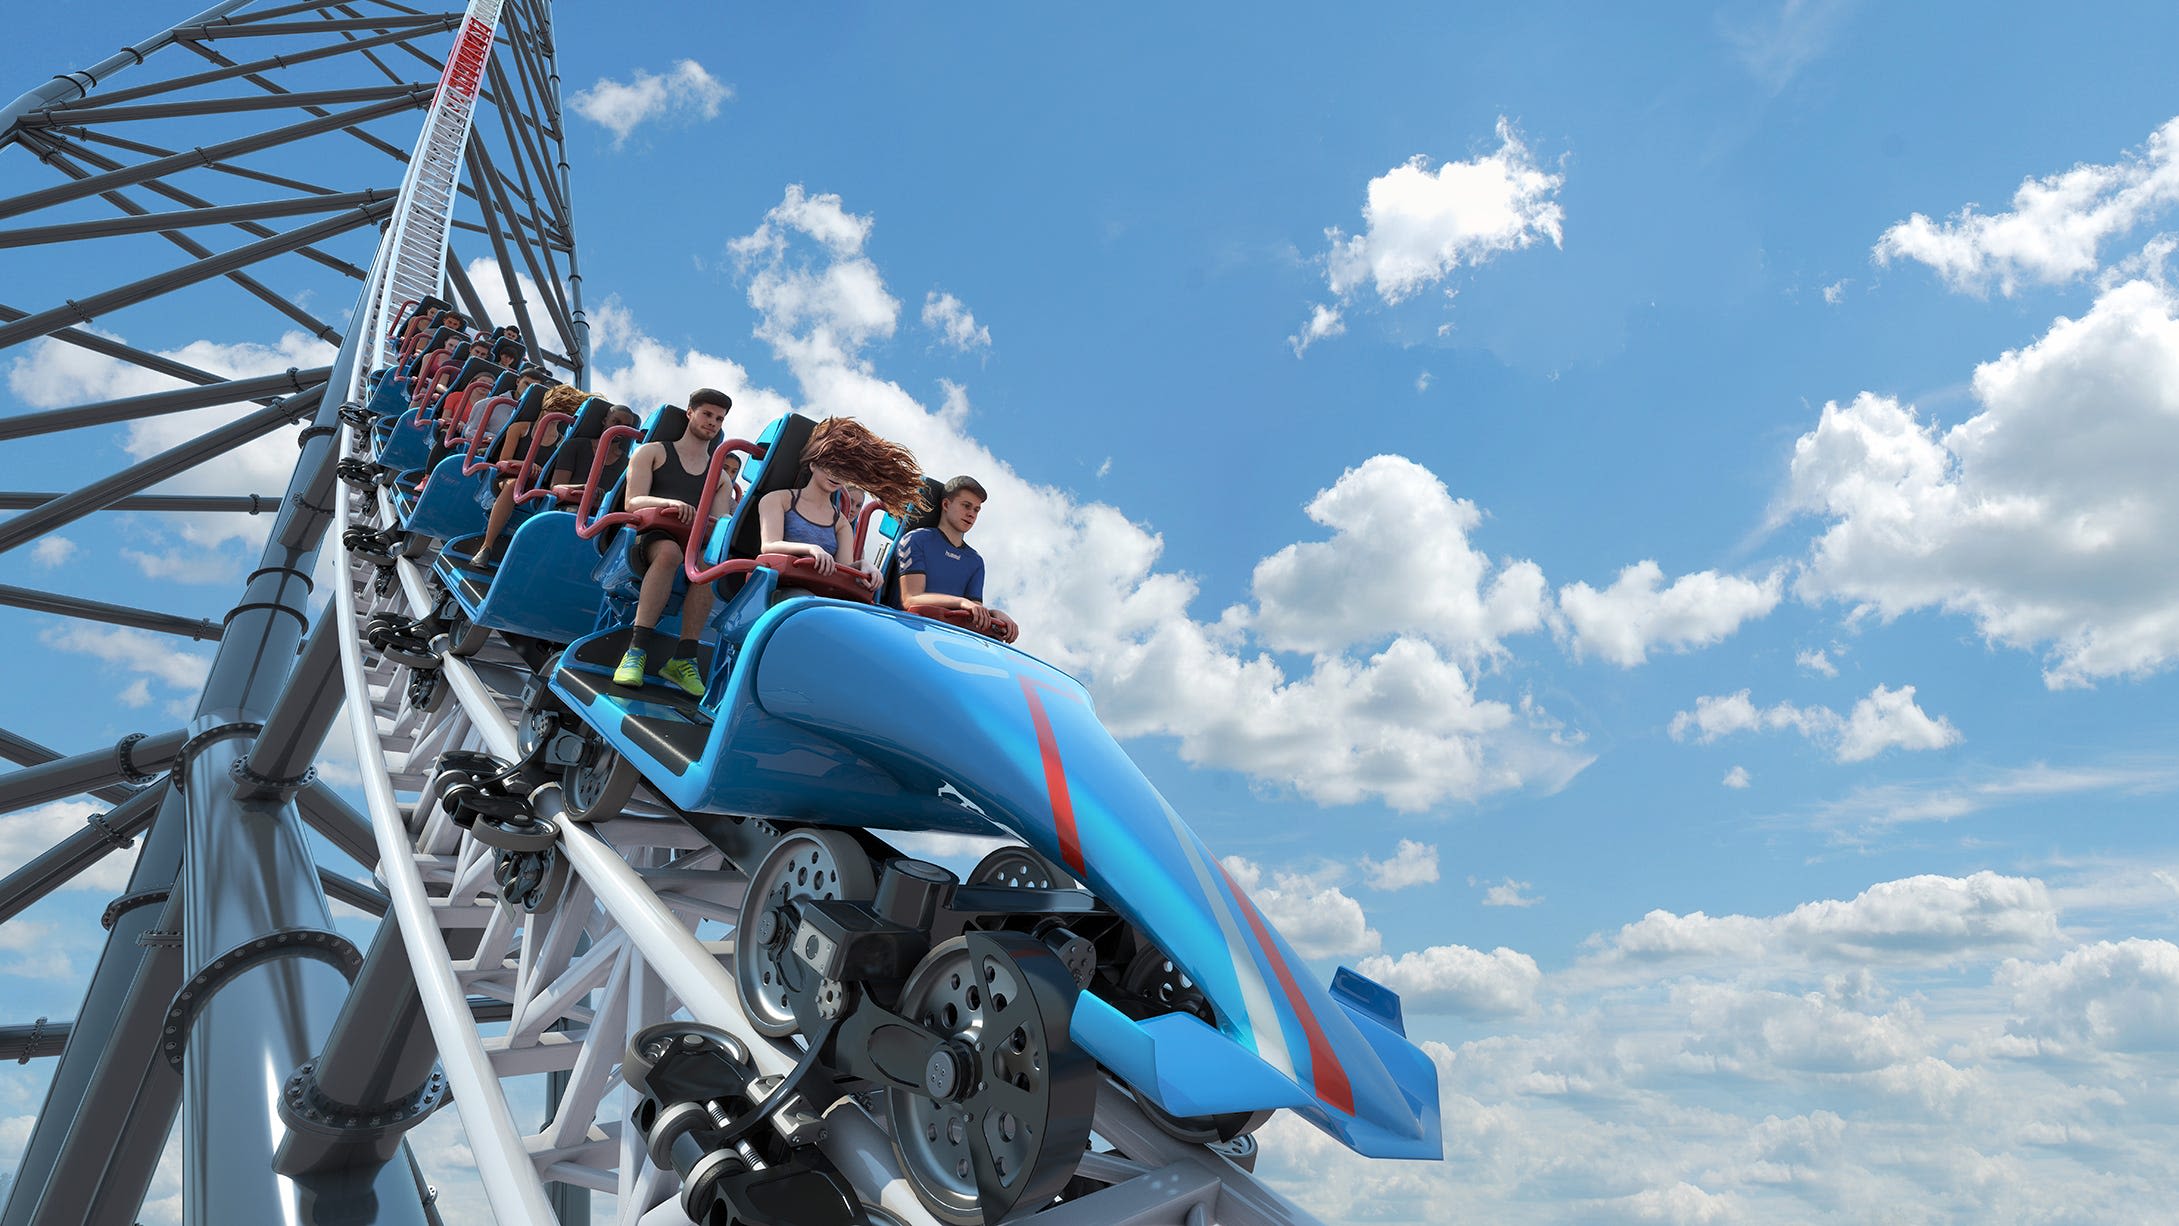 Cedar Point, much-anticipated new Top Thrill ride, opens Saturday with new rules